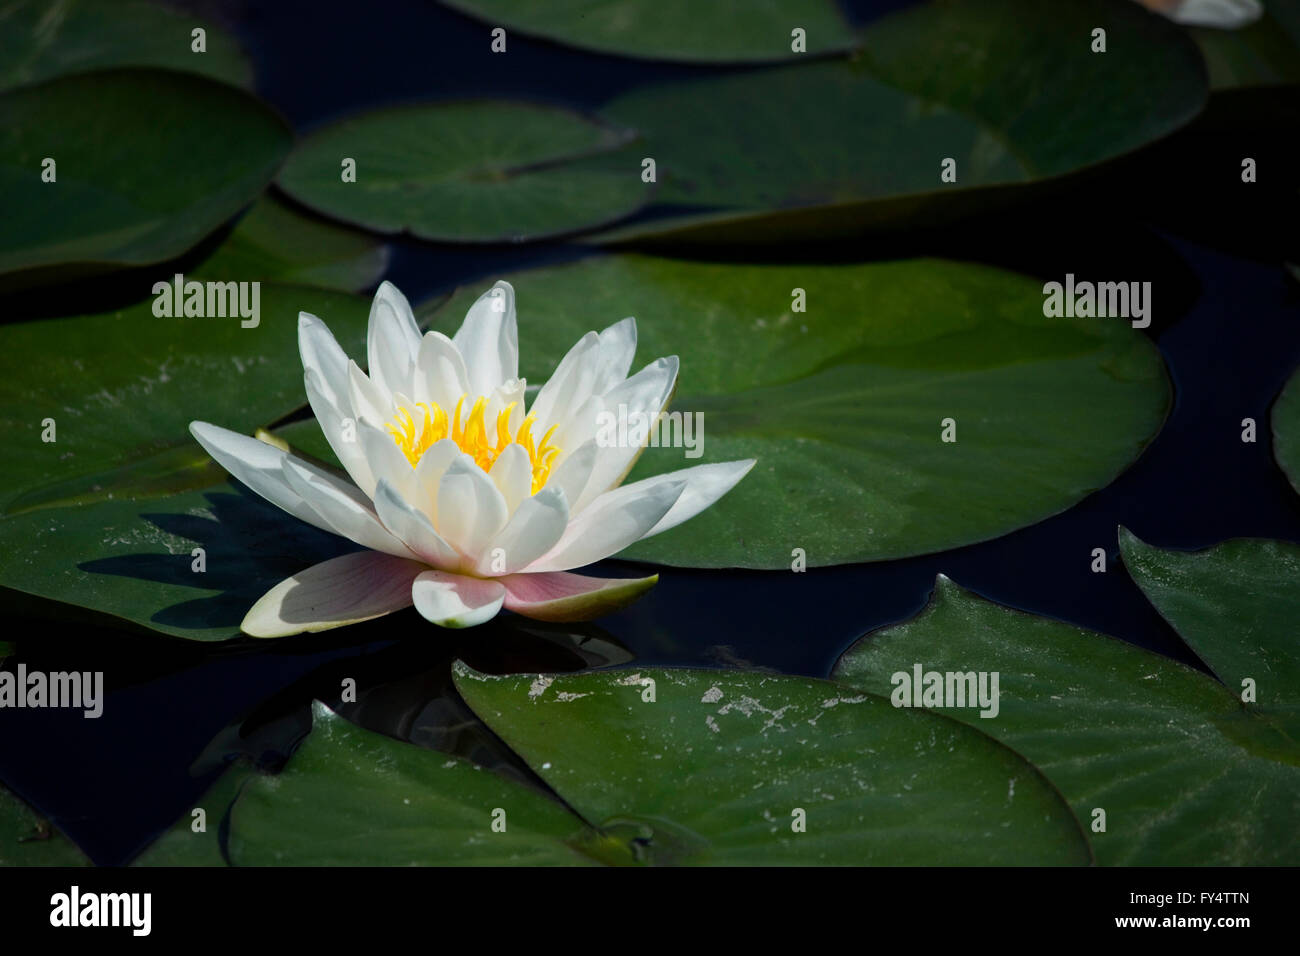 Close-up of a sacred fresh white water lily (waterlily cultivar) hydrophilic herb blossom surrounded by floating lily pads. Stock Photo